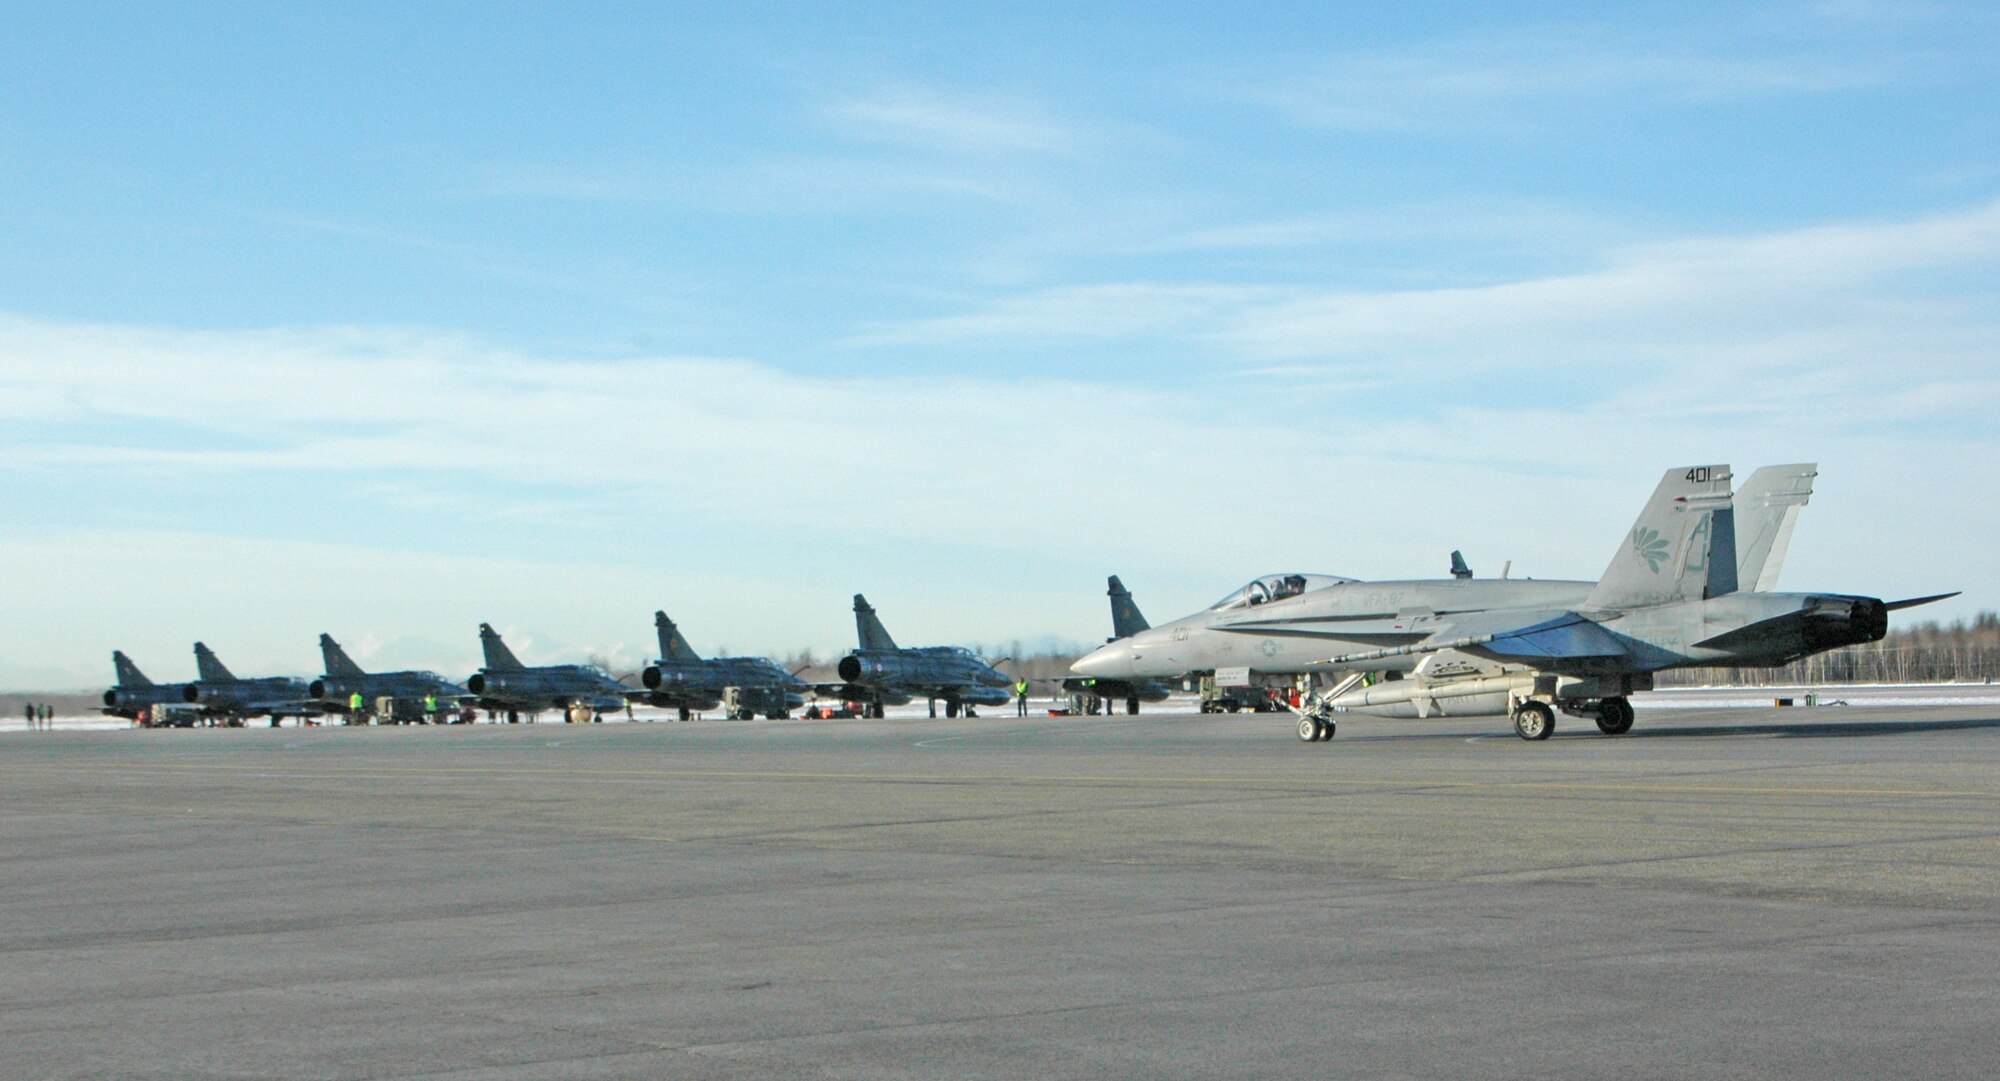 EIELSON AIR FORCE BASE, Alaska--An F-18 Hornet from the Strike Fighter Squadron in Naval Air Station, Va., taxis past French air force Mirage 2000 jets April 6 on the flight line here. More than 1,300 military members from the United States, France and Australia are gathering in the Last Frontier to participate in Red Flag-Alaska 07-1 scheduled from April 5 to 21. (U.S. Air Force photo by Senior Airman Justin Weaver).